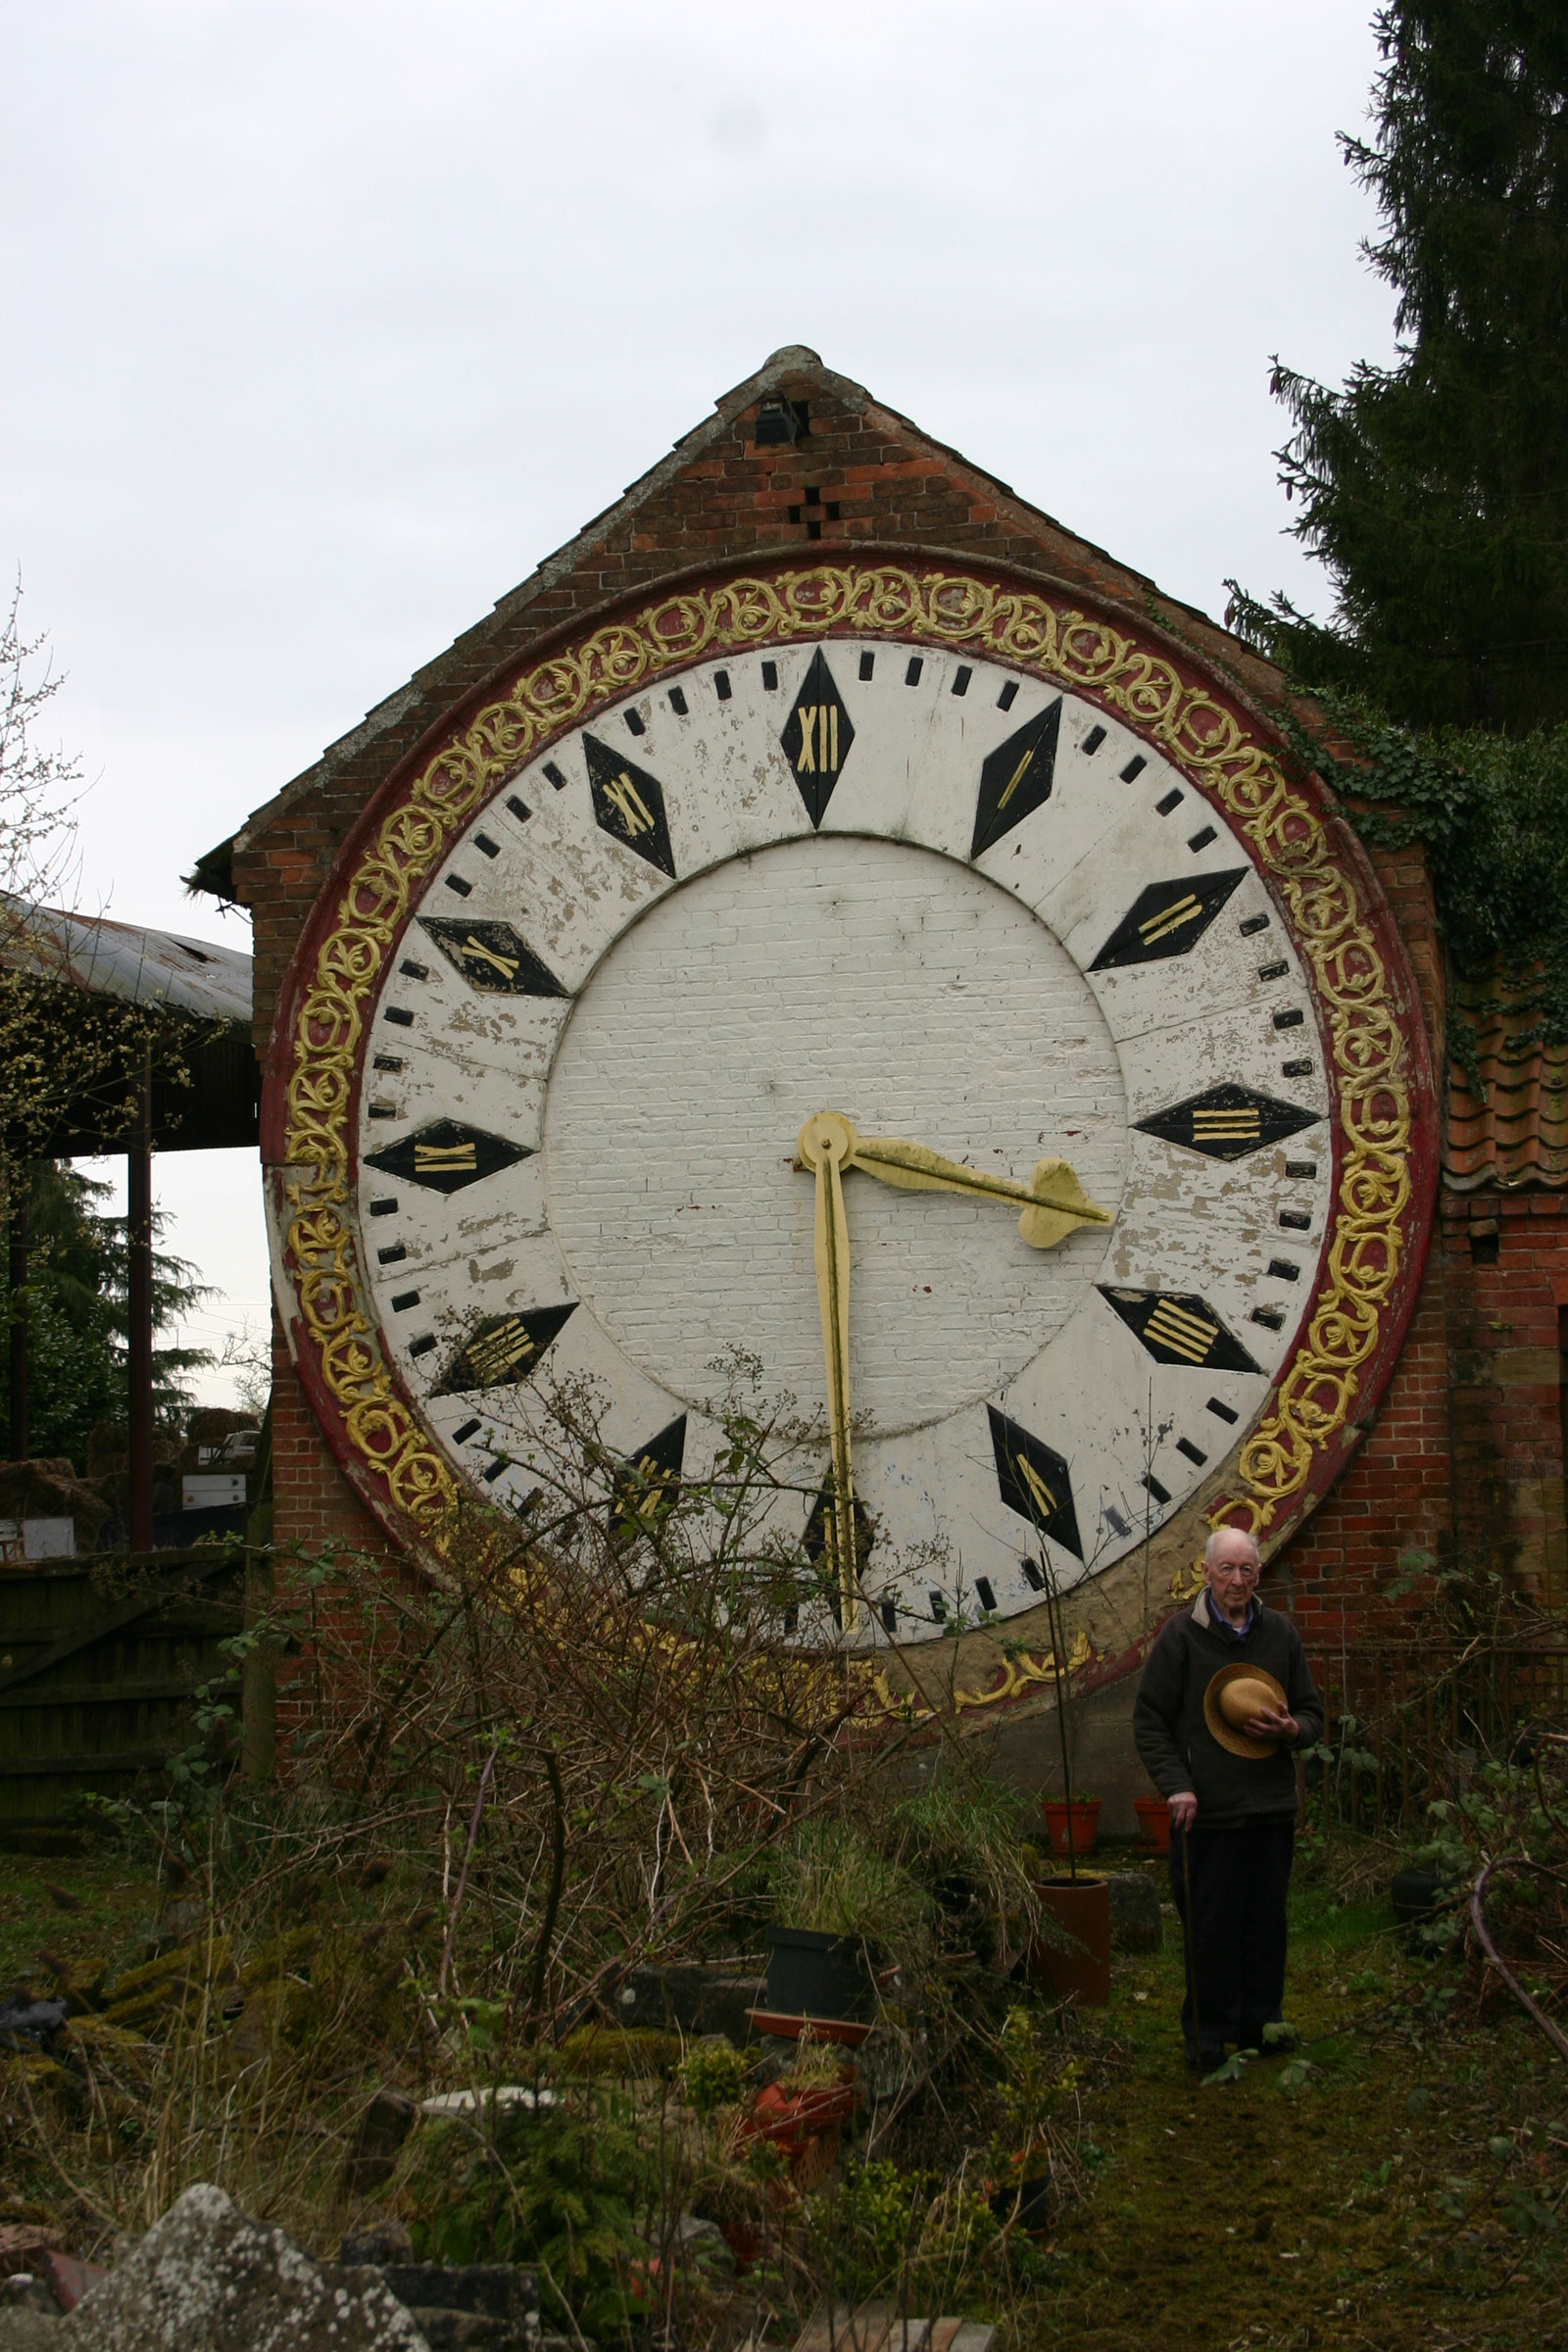 A photograph of Roland Hoggard in front of the restored St. Pancras railway station clock installed on a wall in his garden.